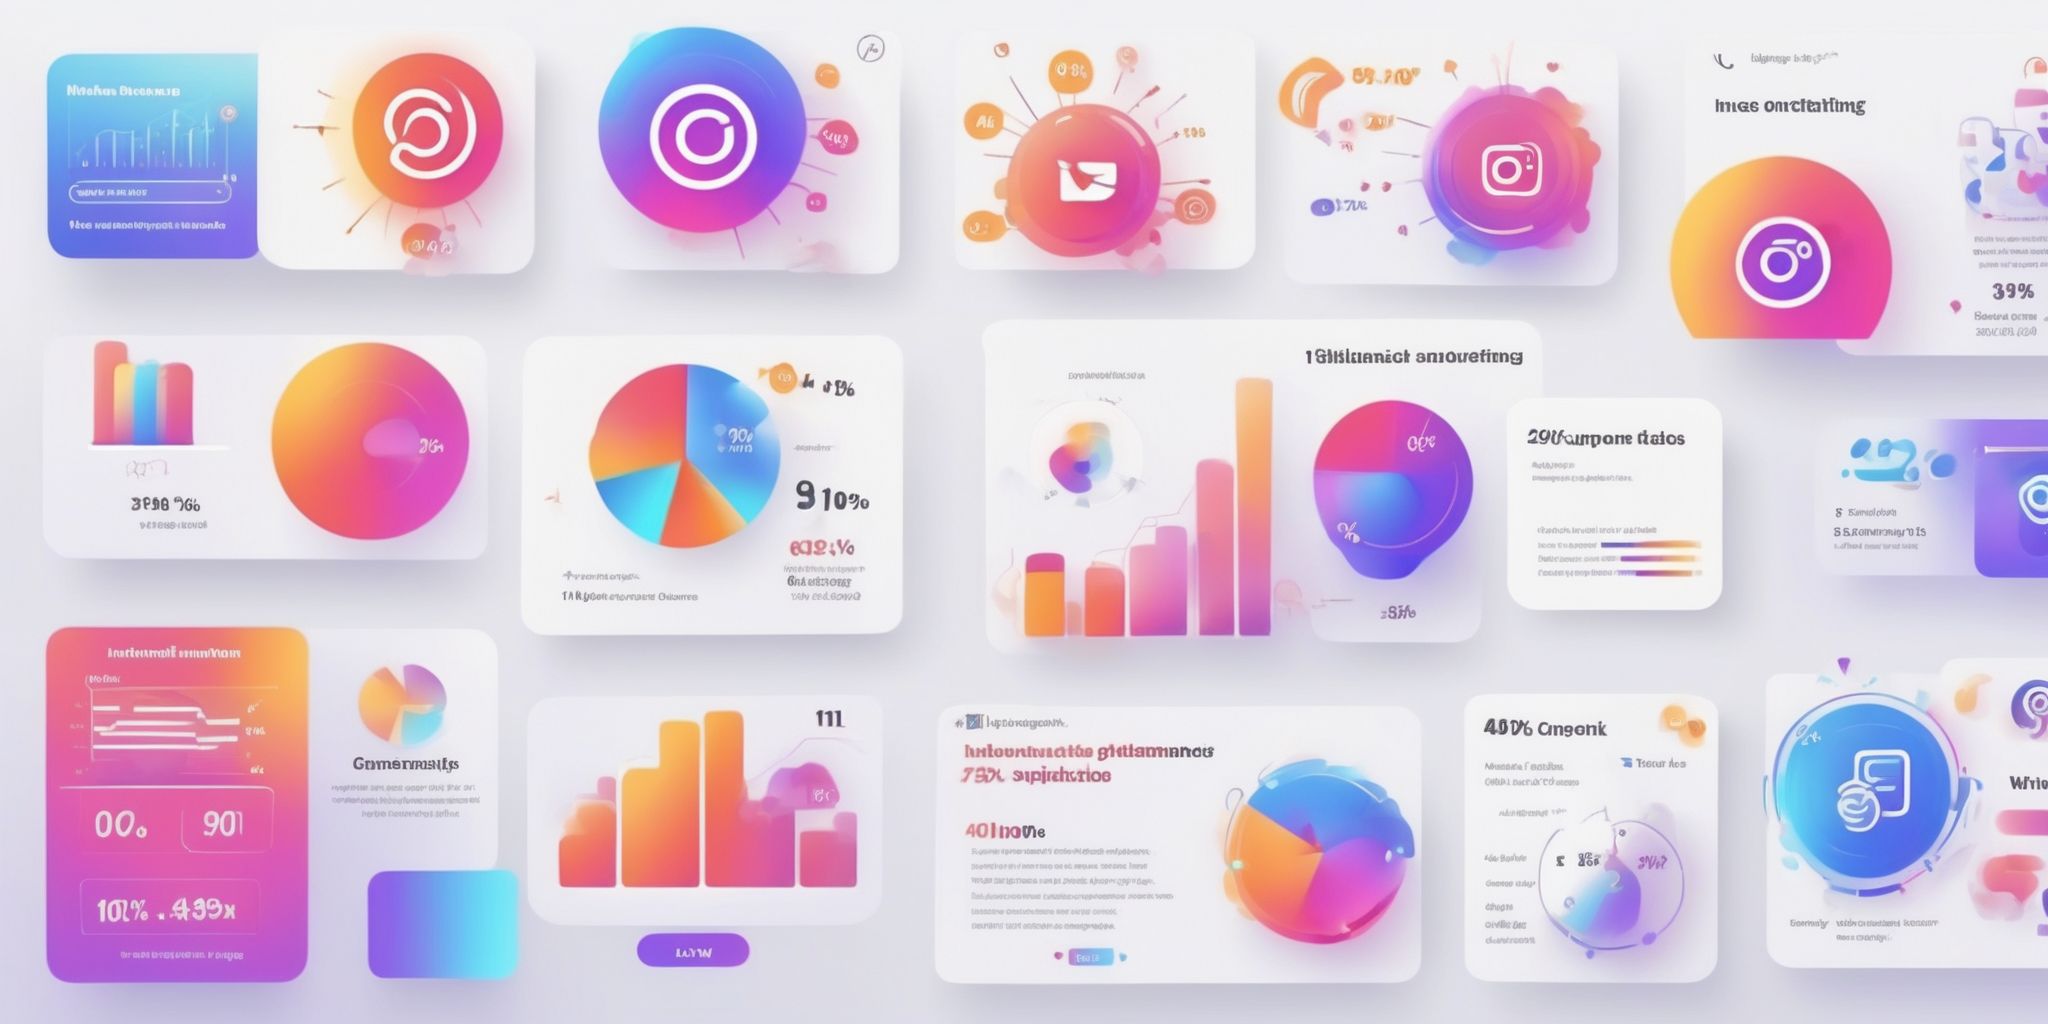 Instagram marketing statistics in illustration style with gradients and white background